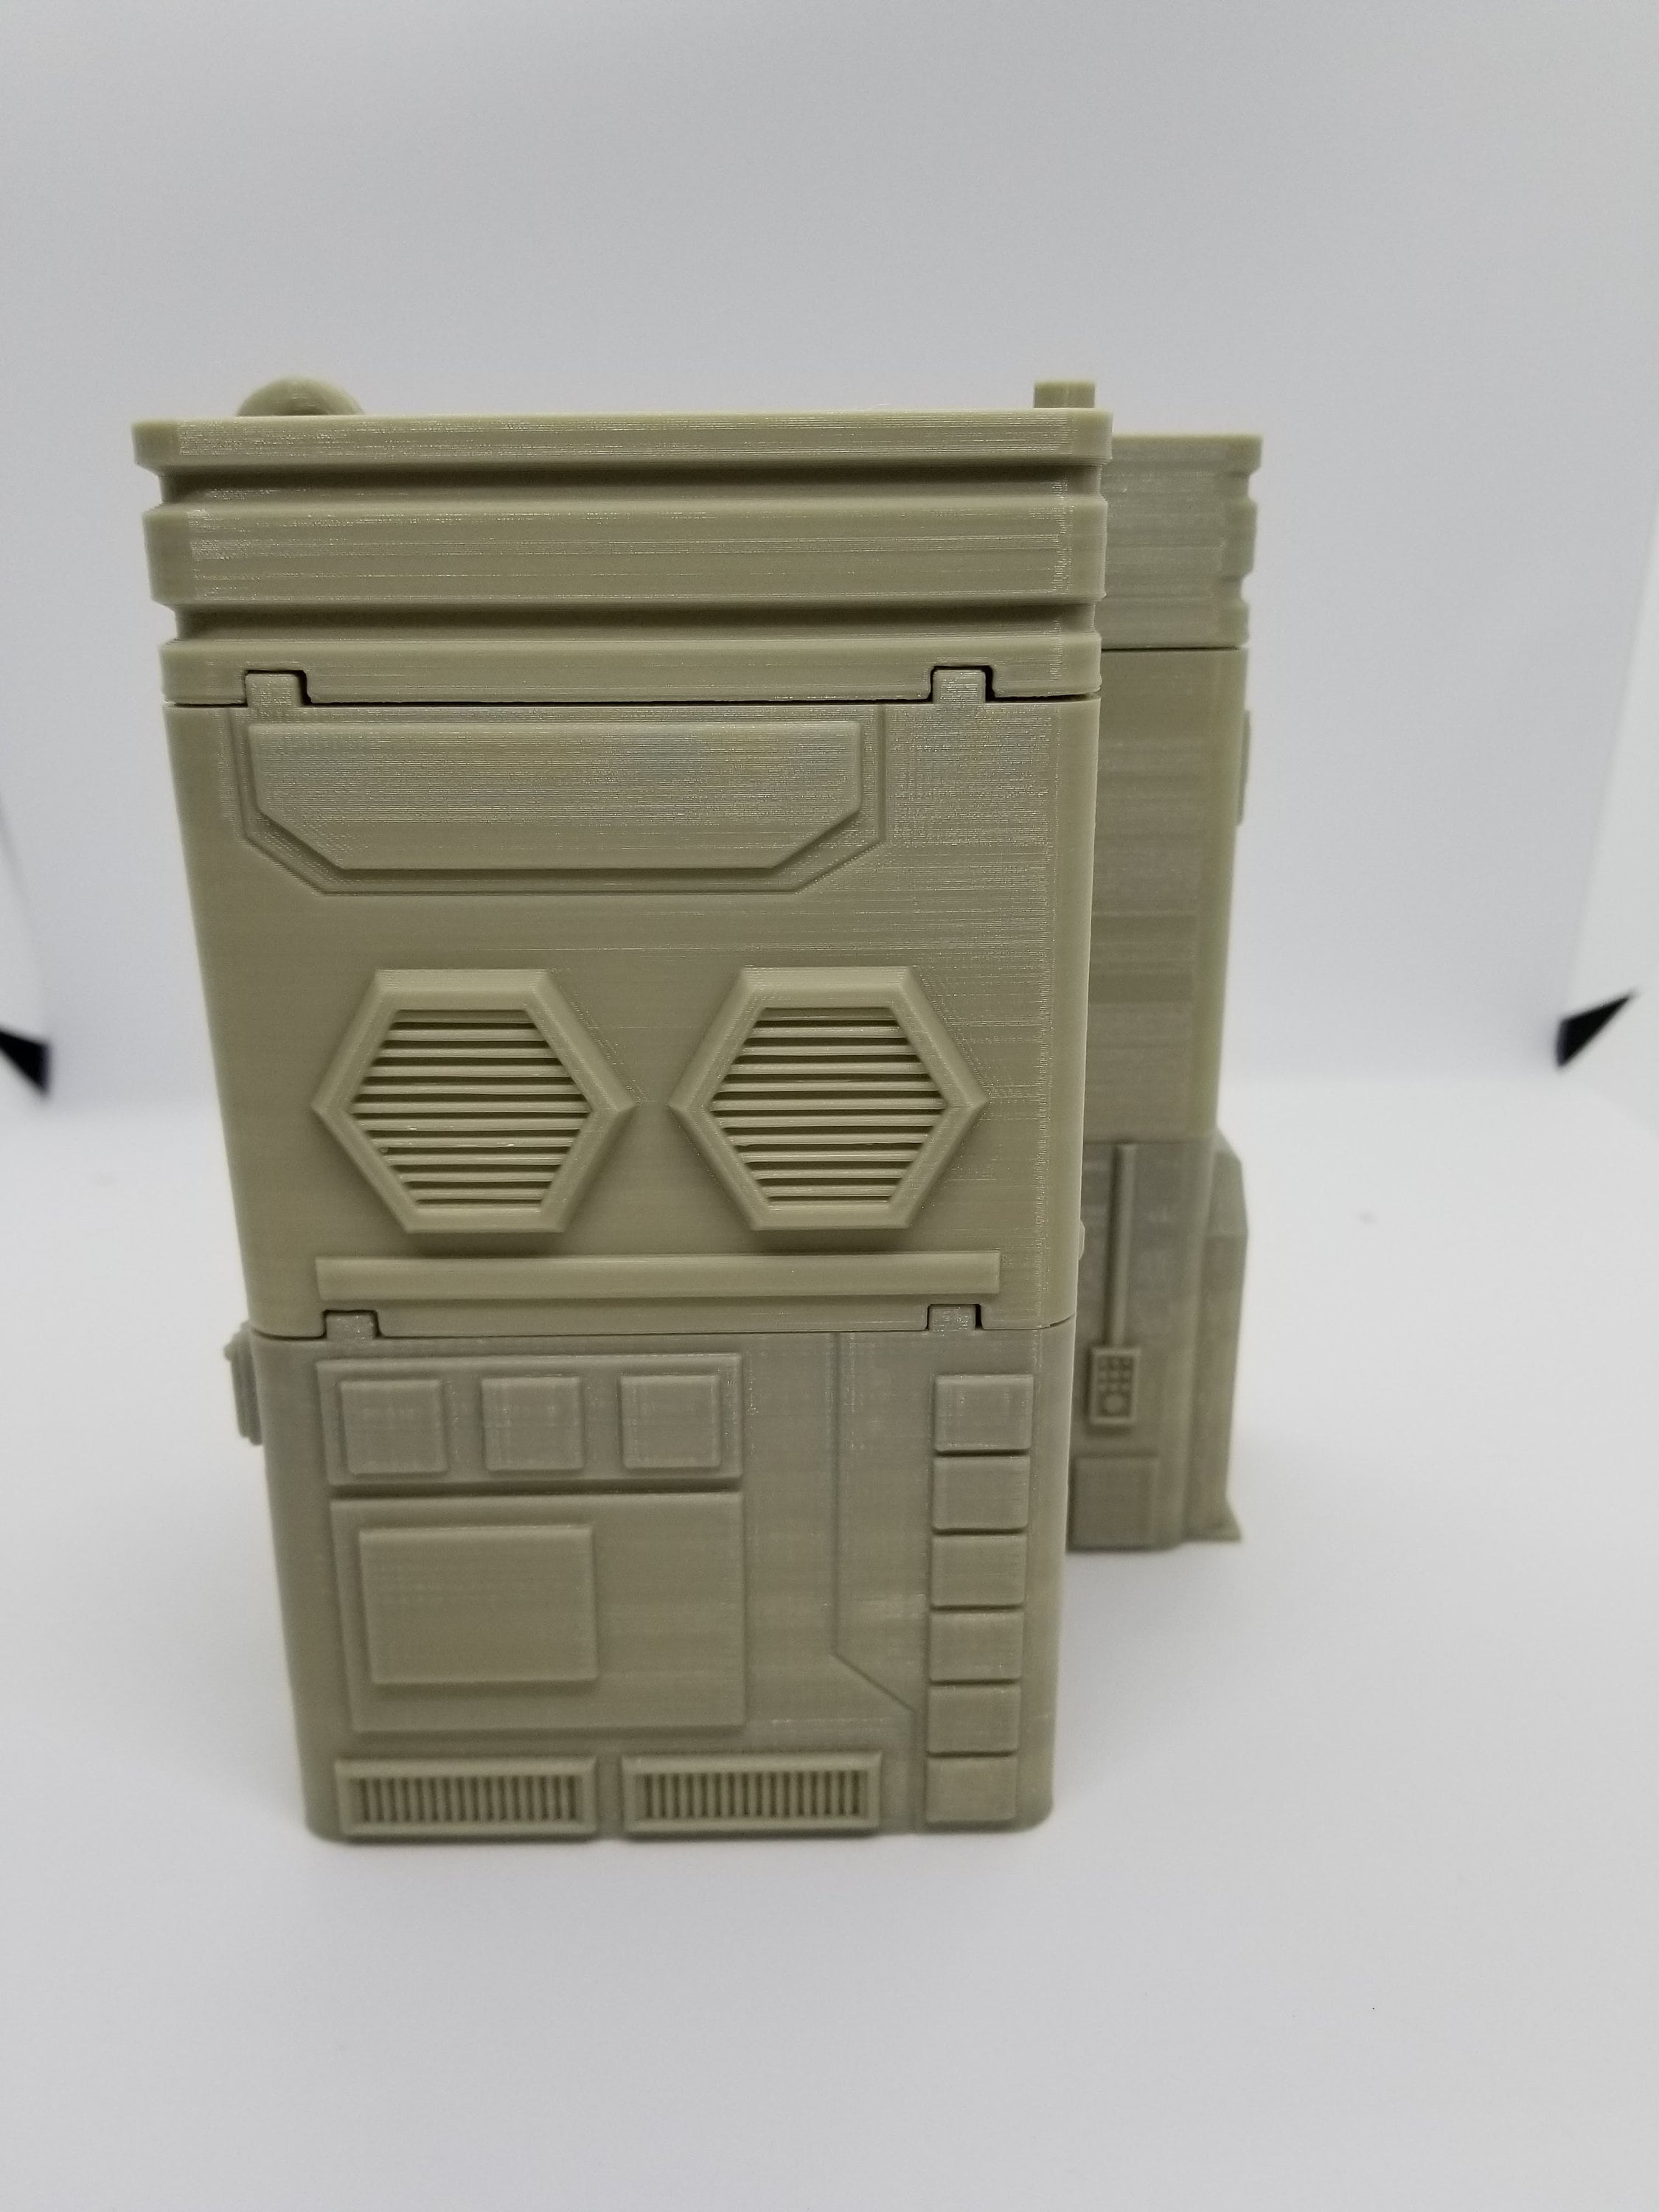 3d Printed Legion Compatible Small City House 2 / Corvus Games Terrain Licensed Printer / Print to Order